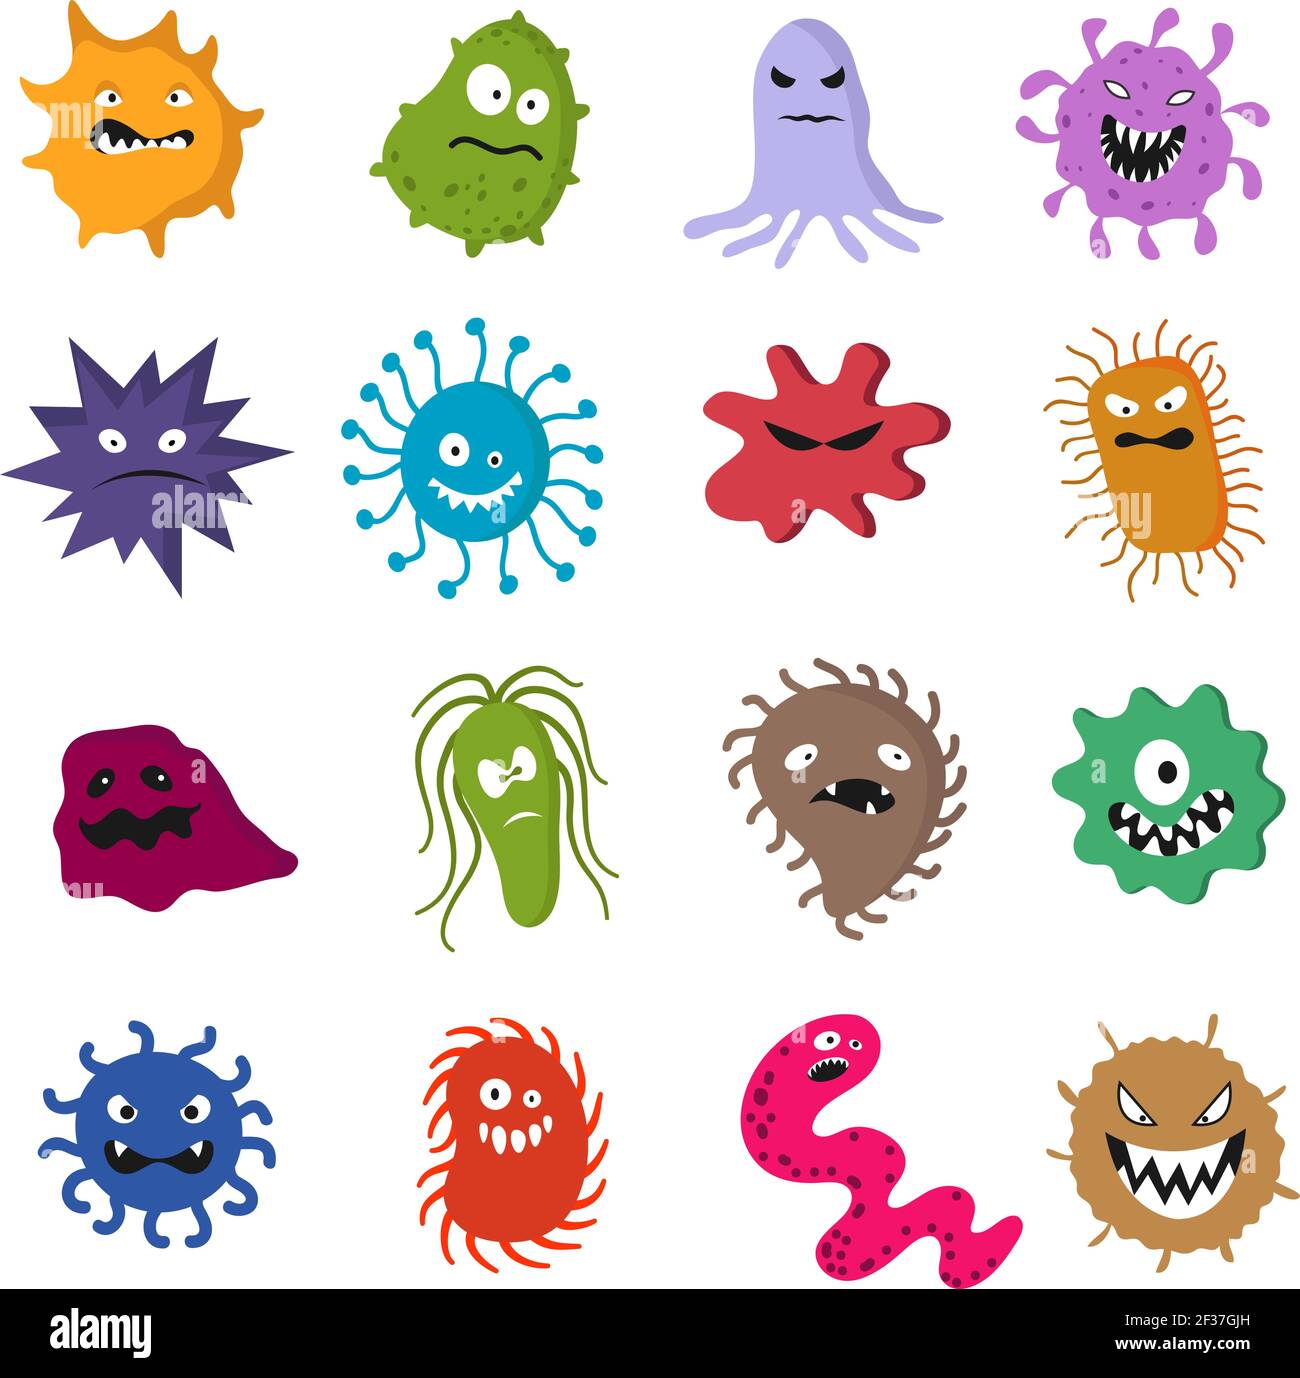 Funny cartoon cute virus and bacteria set isolated on white background. Color monster and bacteria, microbe character illustration Stock Vector